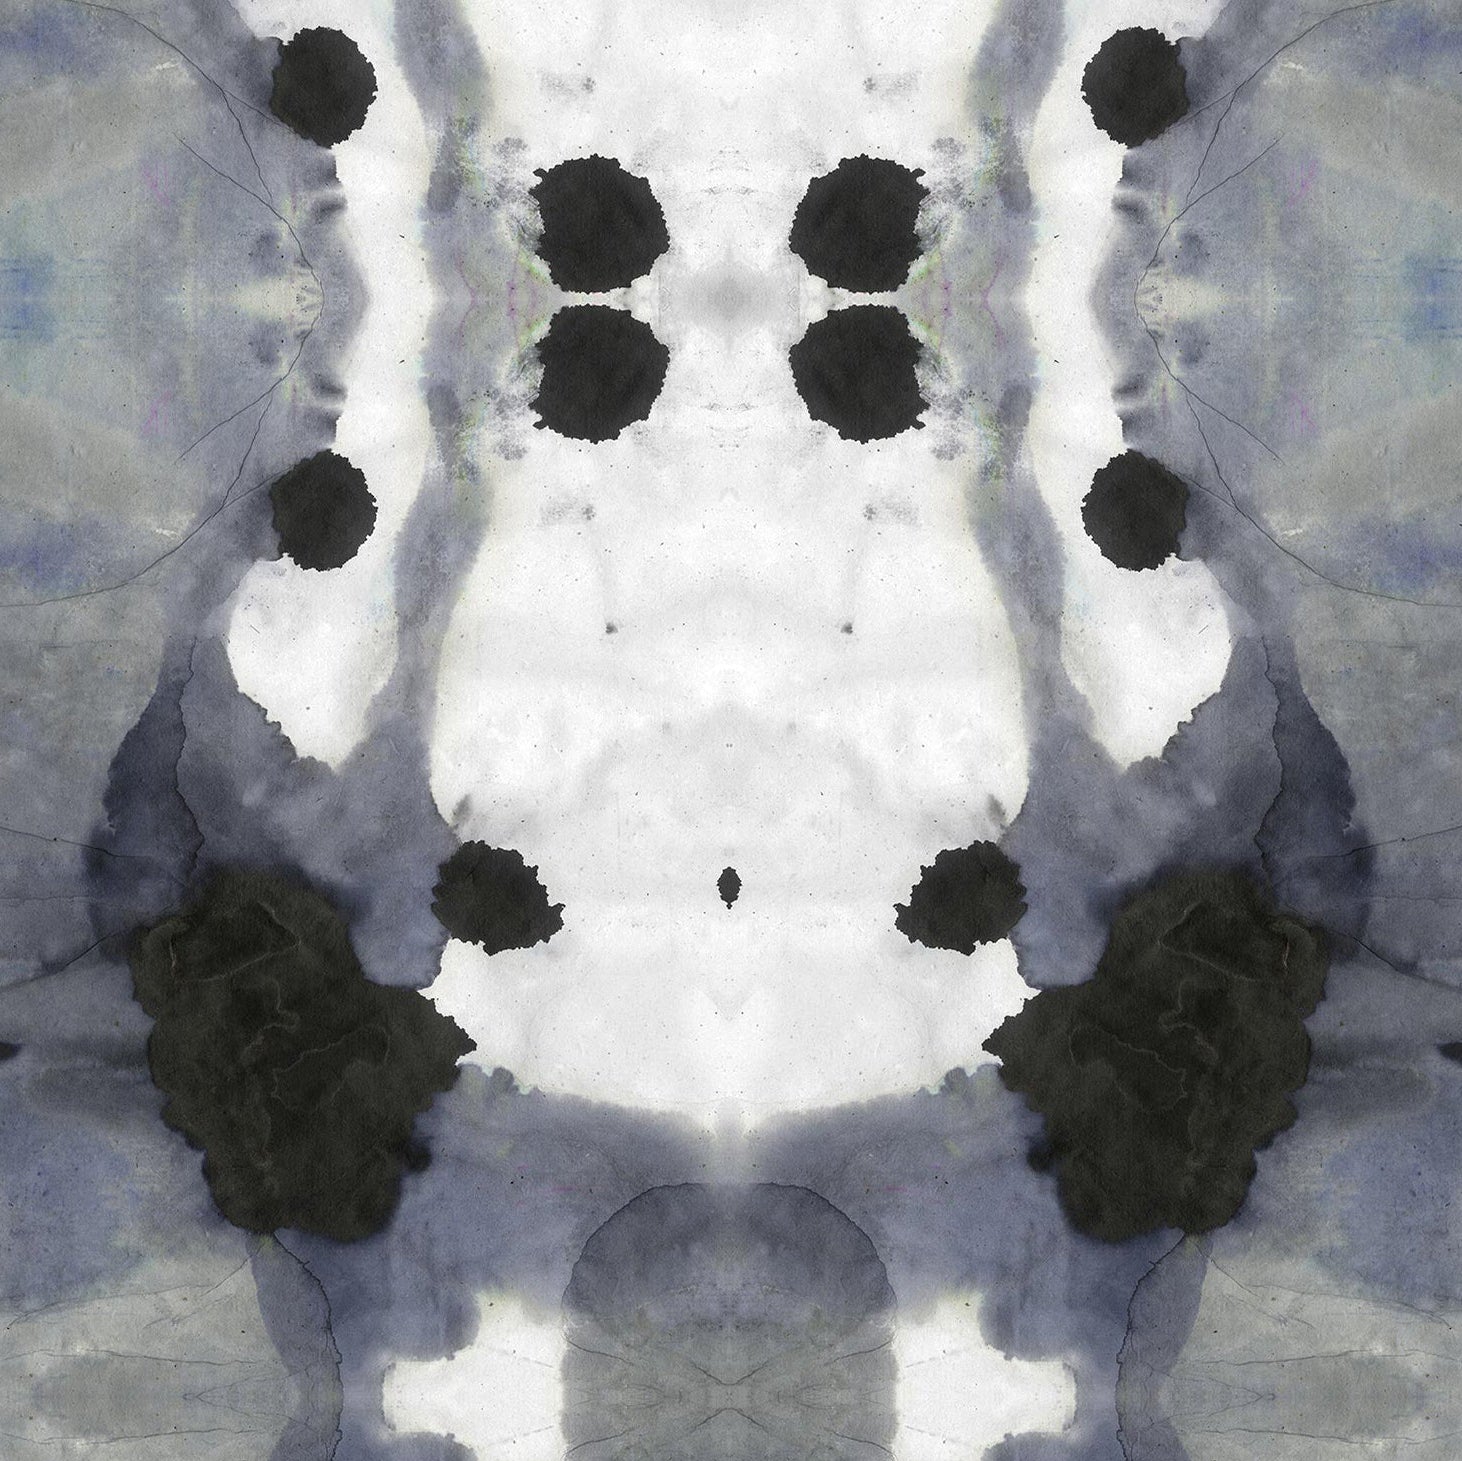 Detail of wallpaper in an abstract ink blot print in shades of charcoal and gray on a white field.